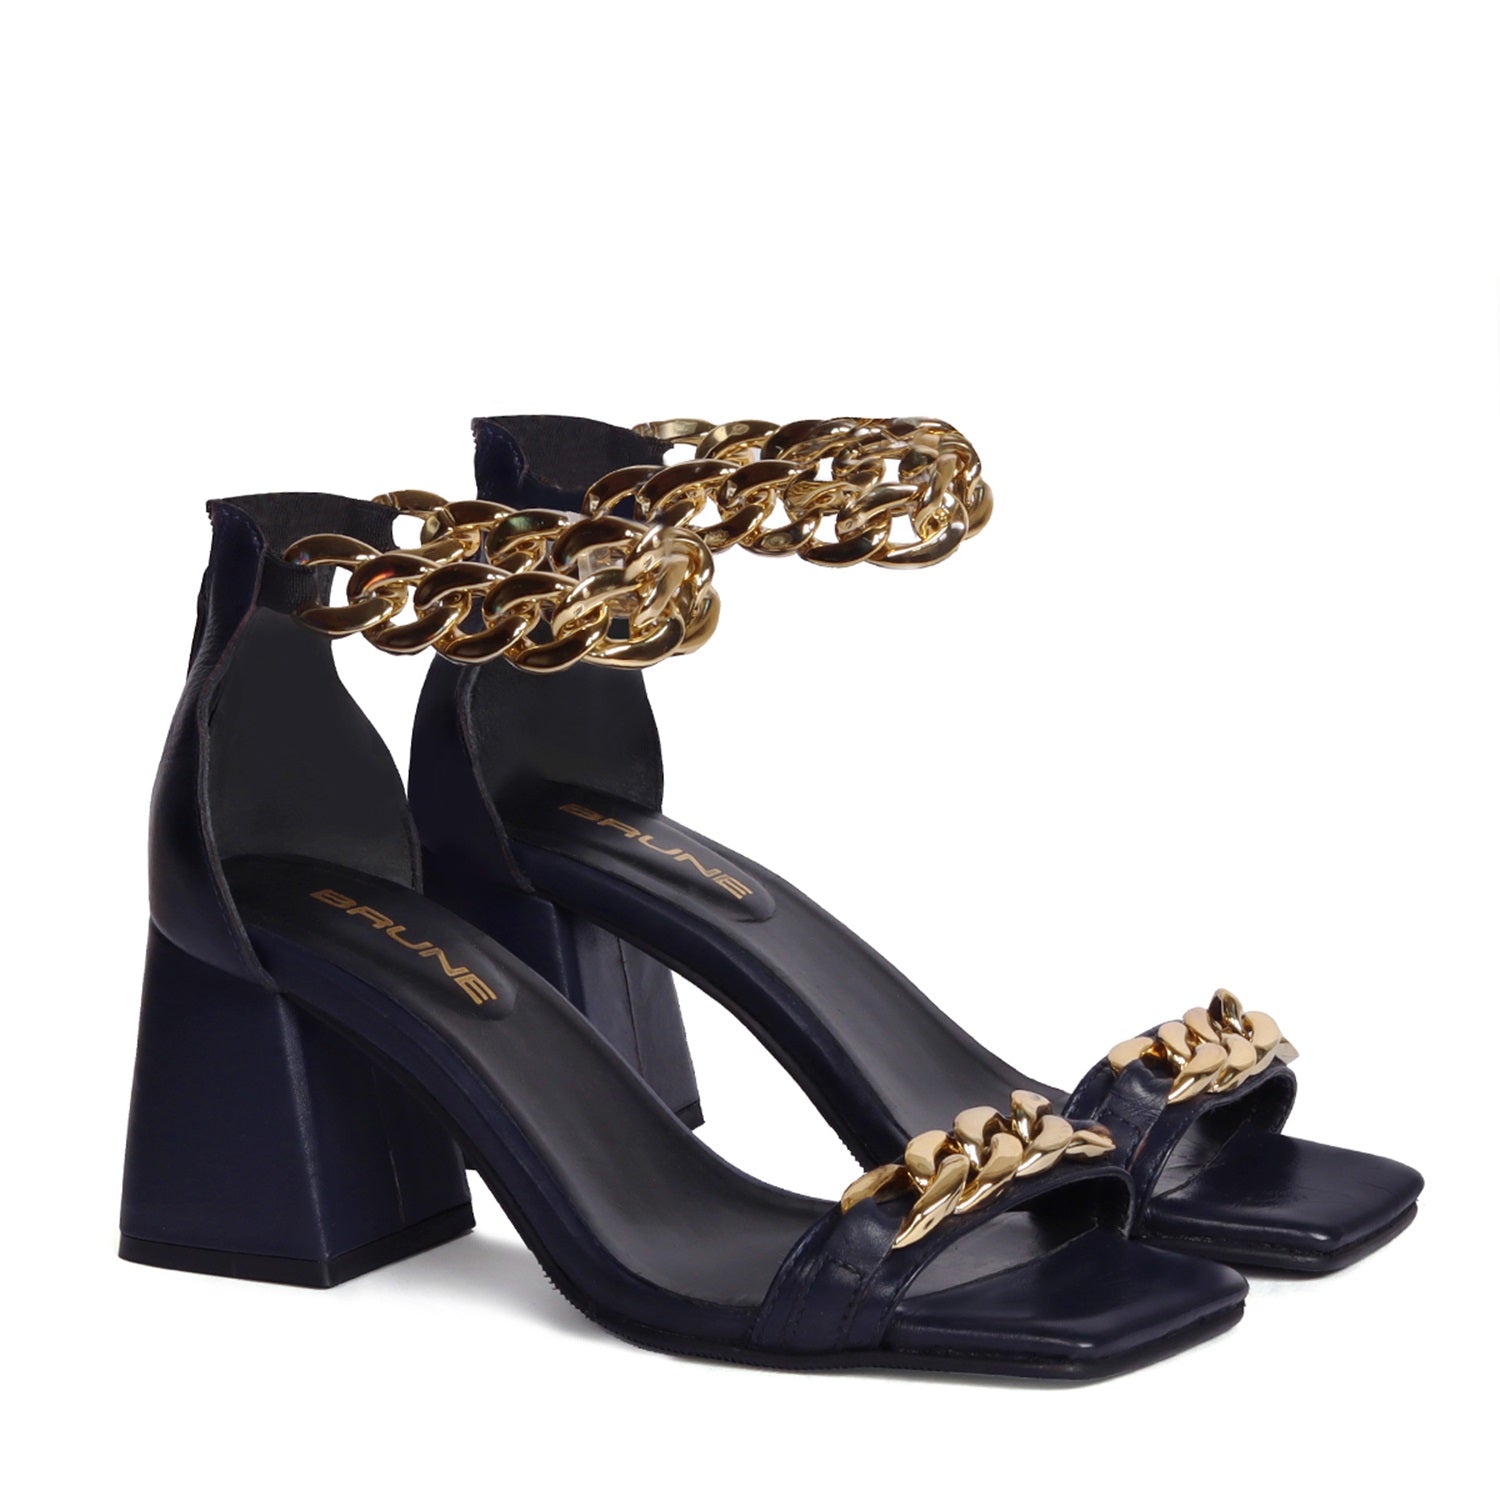 Buy Gold Heeled Sandals for Women by Everqupid Online | Ajio.com